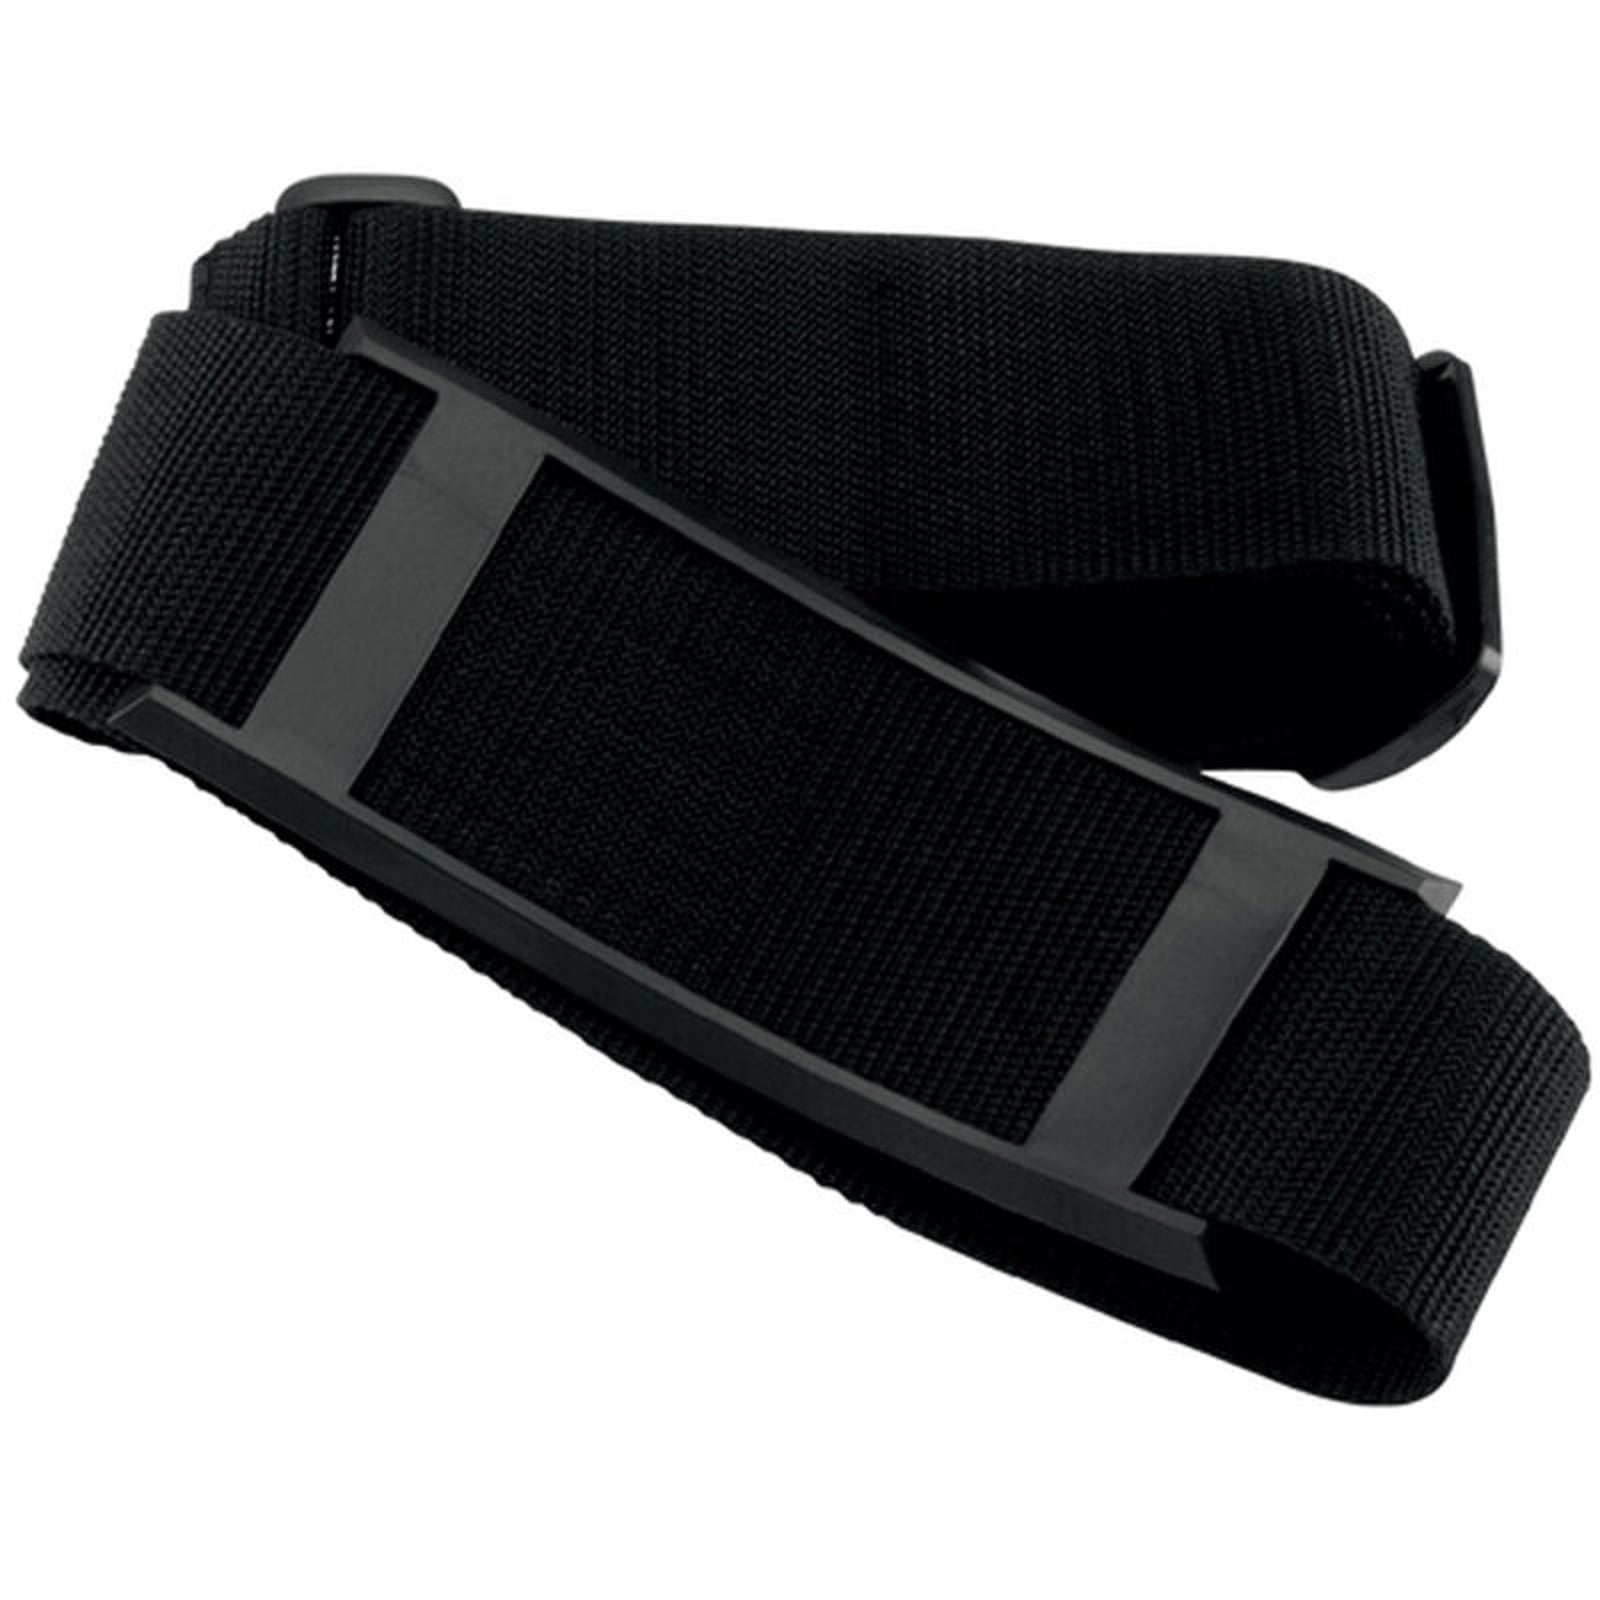 Genuine Bissell Lift Off Style 8  3750 6595 Series Belts 2Pk 